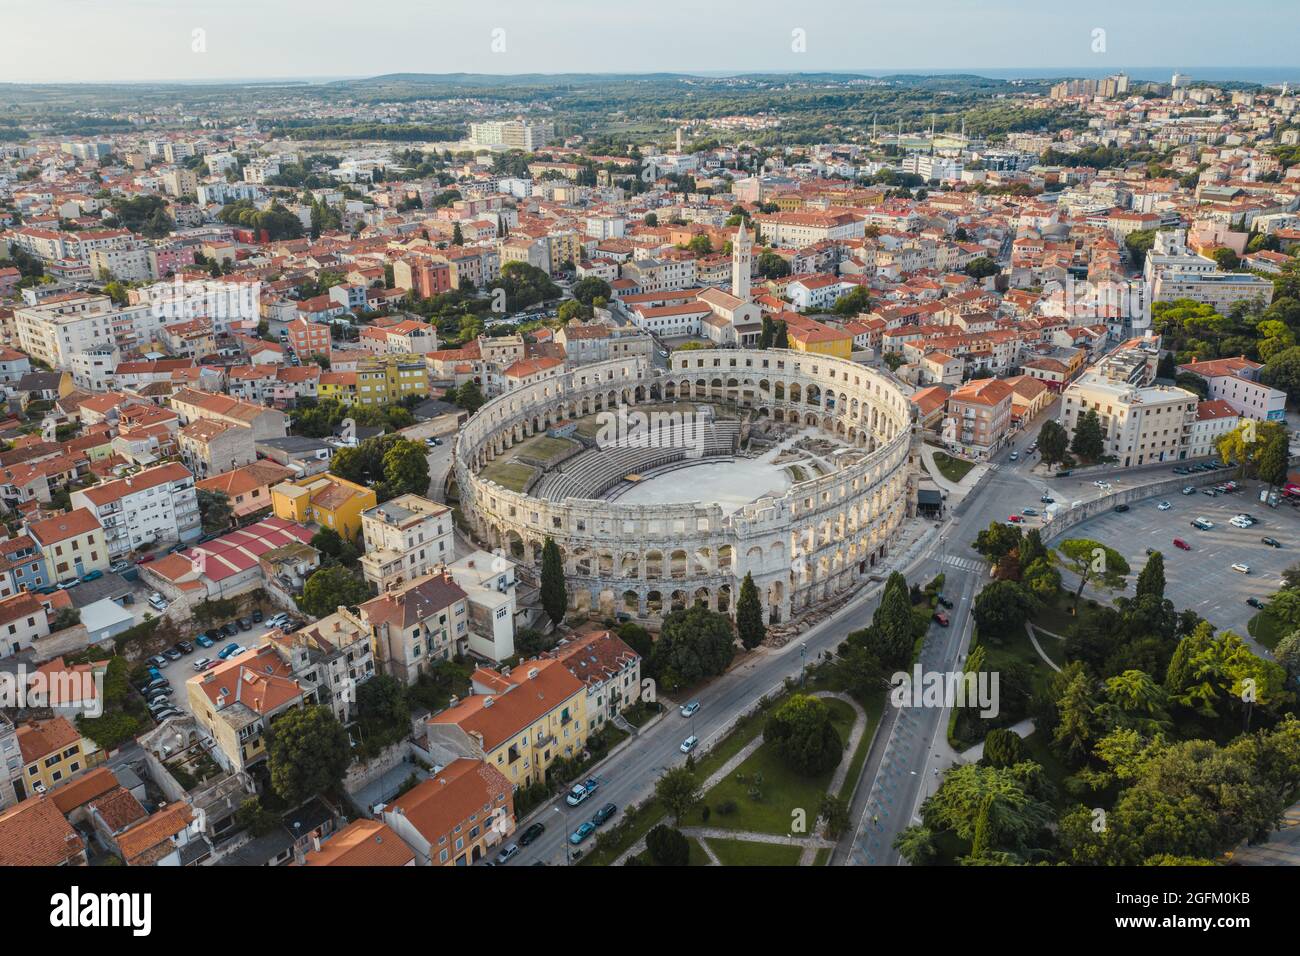 Pula aerial view Stock Photo